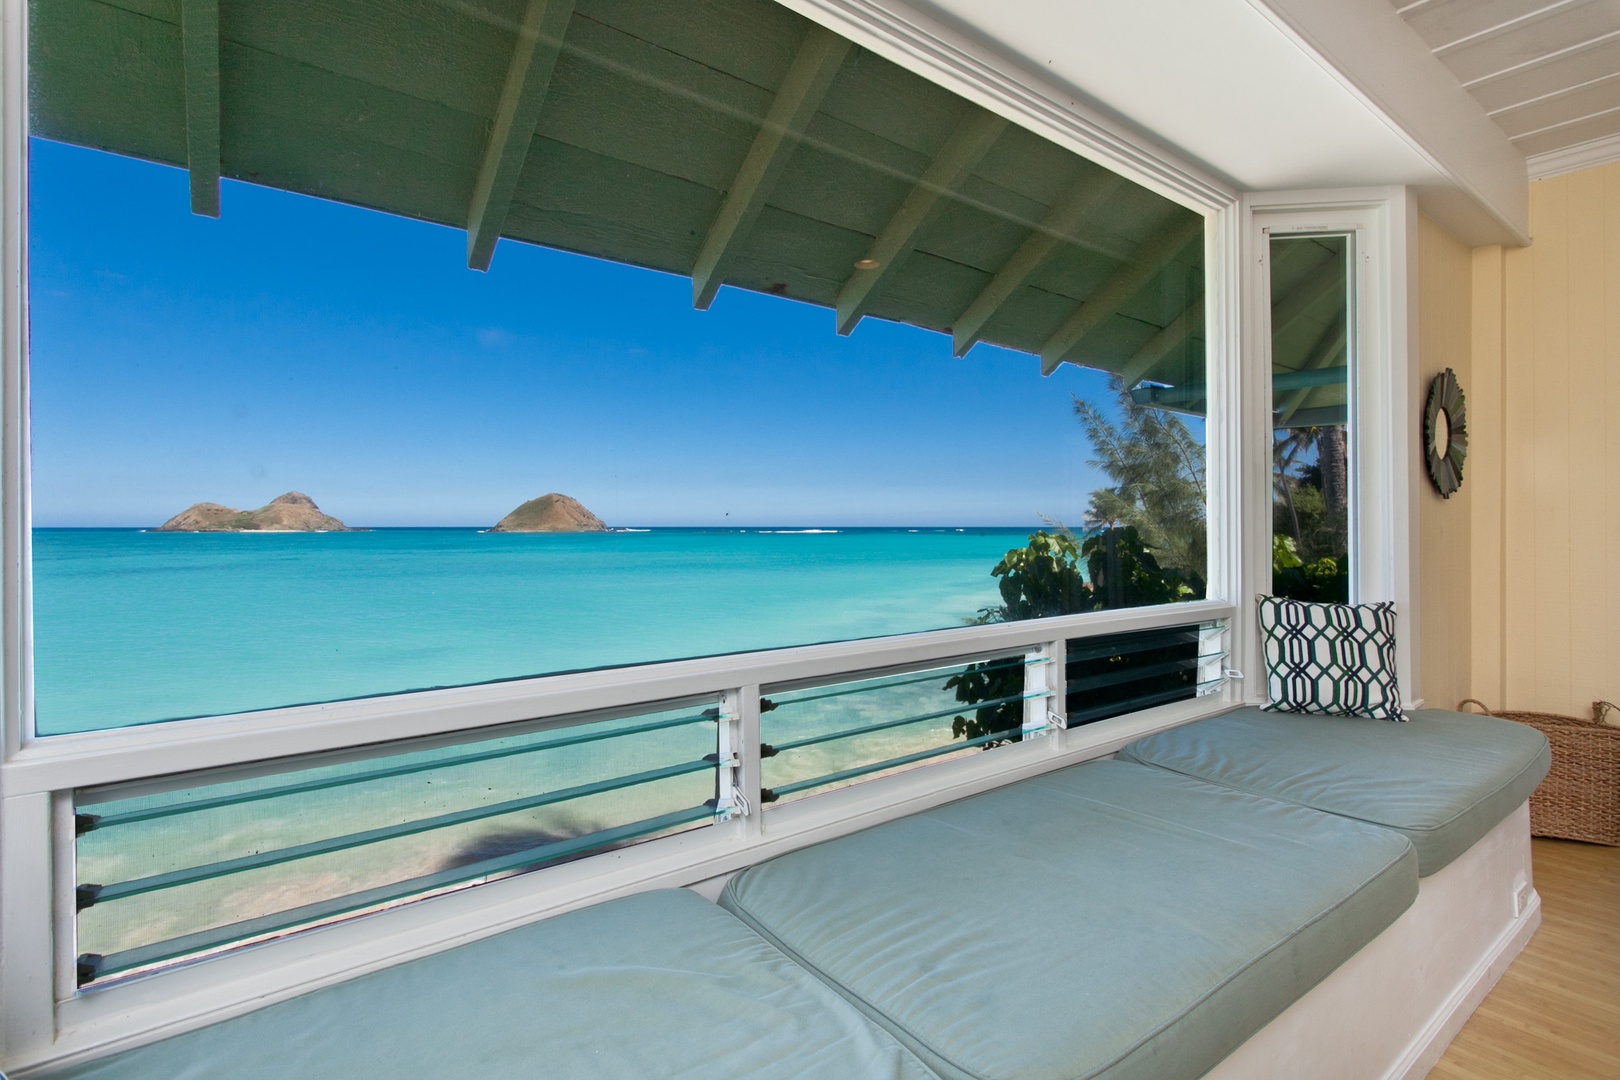 Kailua Vacation Rentals, Hale Kainalu* - Ocean view nook, a charming window seat easily transformed into a daybed.